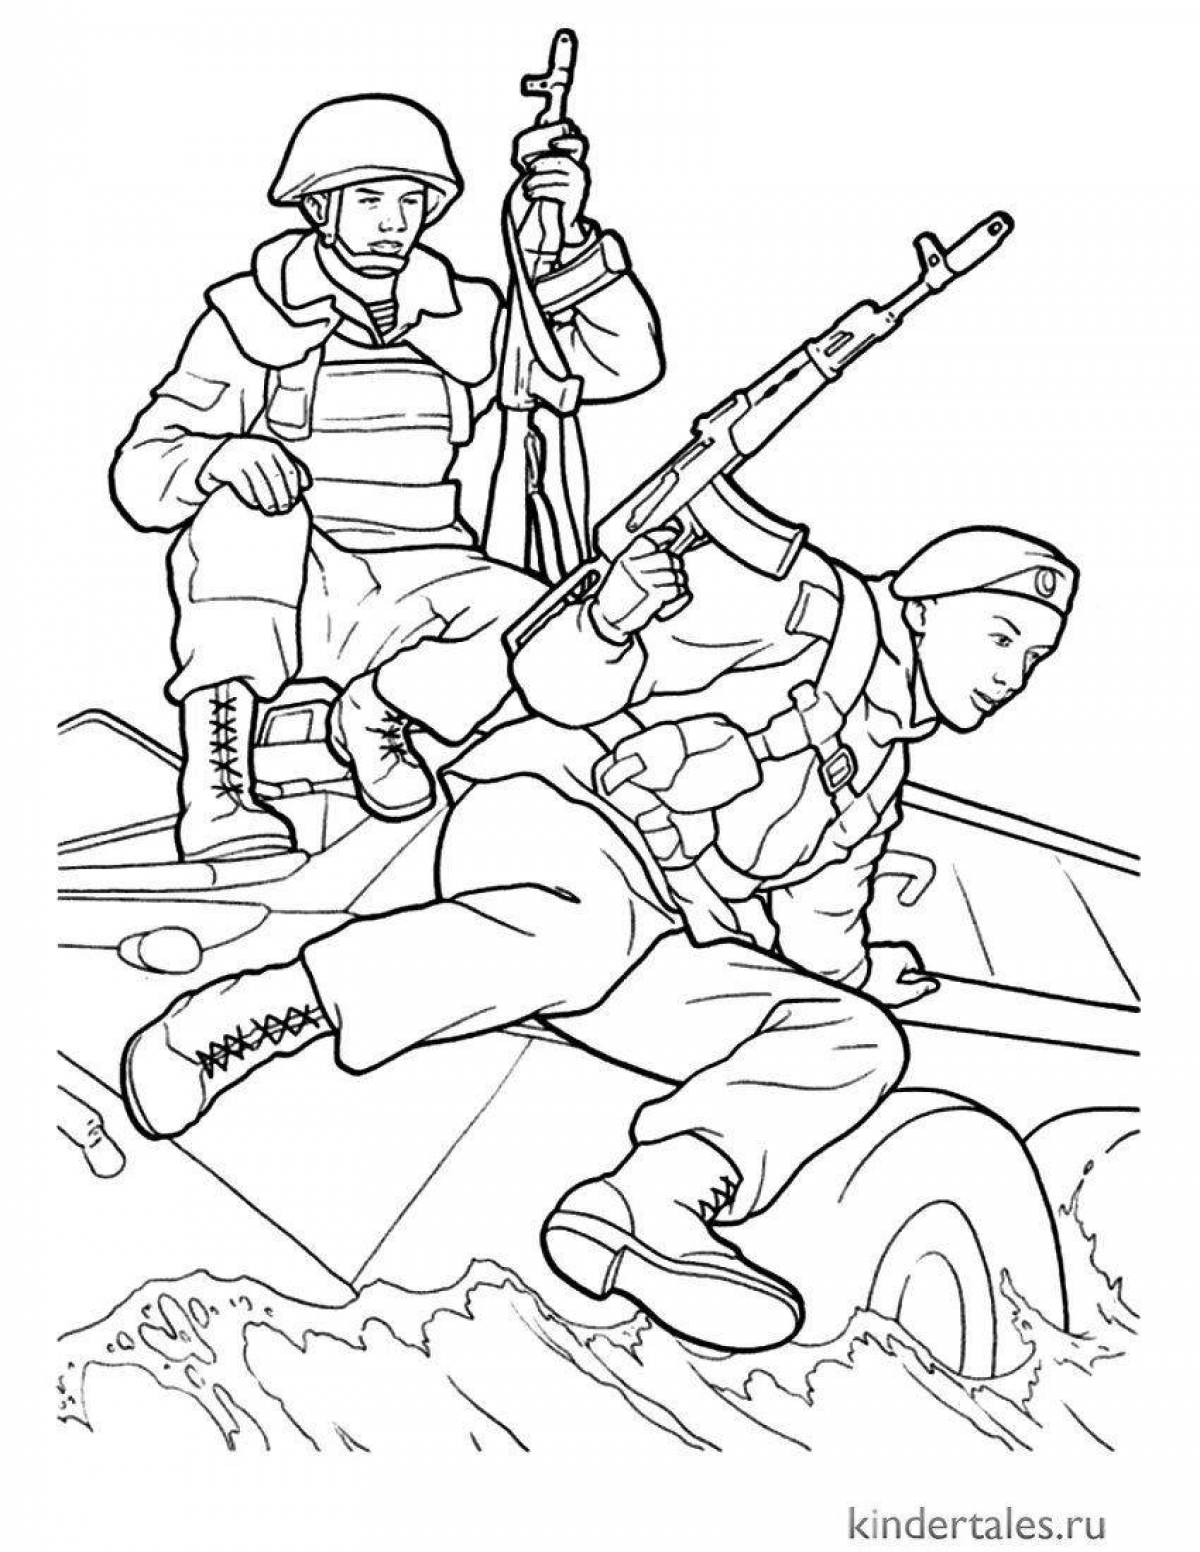 Impressive defender of the fatherland coloring page